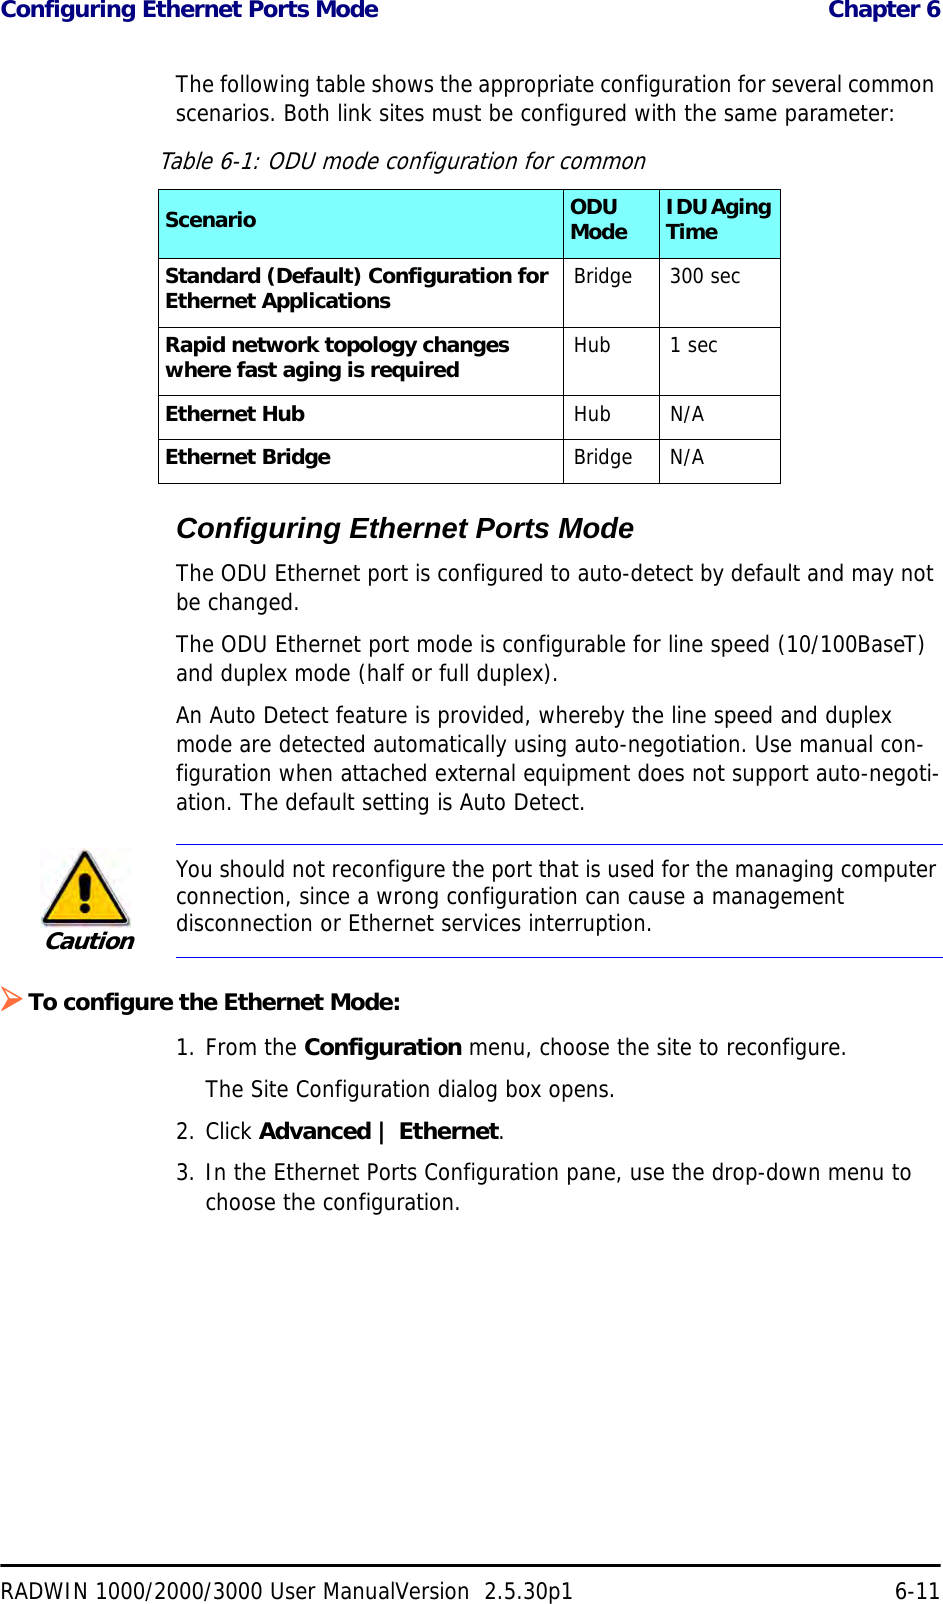 Configuring Ethernet Ports Mode  Chapter 6RADWIN 1000/2000/3000 User ManualVersion  2.5.30p1 6-11The following table shows the appropriate configuration for several common scenarios. Both link sites must be configured with the same parameter:Configuring Ethernet Ports ModeThe ODU Ethernet port is configured to auto-detect by default and may not be changed.The ODU Ethernet port mode is configurable for line speed (10/100BaseT) and duplex mode (half or full duplex).An Auto Detect feature is provided, whereby the line speed and duplex mode are detected automatically using auto-negotiation. Use manual con-figuration when attached external equipment does not support auto-negoti-ation. The default setting is Auto Detect.¾To configure the Ethernet Mode:1. From the Configuration menu, choose the site to reconfigure.The Site Configuration dialog box opens.2. Click Advanced | Ethernet.3. In the Ethernet Ports Configuration pane, use the drop-down menu to choose the configuration.Table 6-1: ODU mode configuration for commonScenario ODU Mode IDU Aging TimeStandard (Default) Configuration for Ethernet Applications Bridge 300 secRapid network topology changes where fast aging is required Hub 1 secEthernet Hub Hub N/AEthernet Bridge Bridge N/ACautionYou should not reconfigure the port that is used for the managing computer connection, since a wrong configuration can cause a management disconnection or Ethernet services interruption.